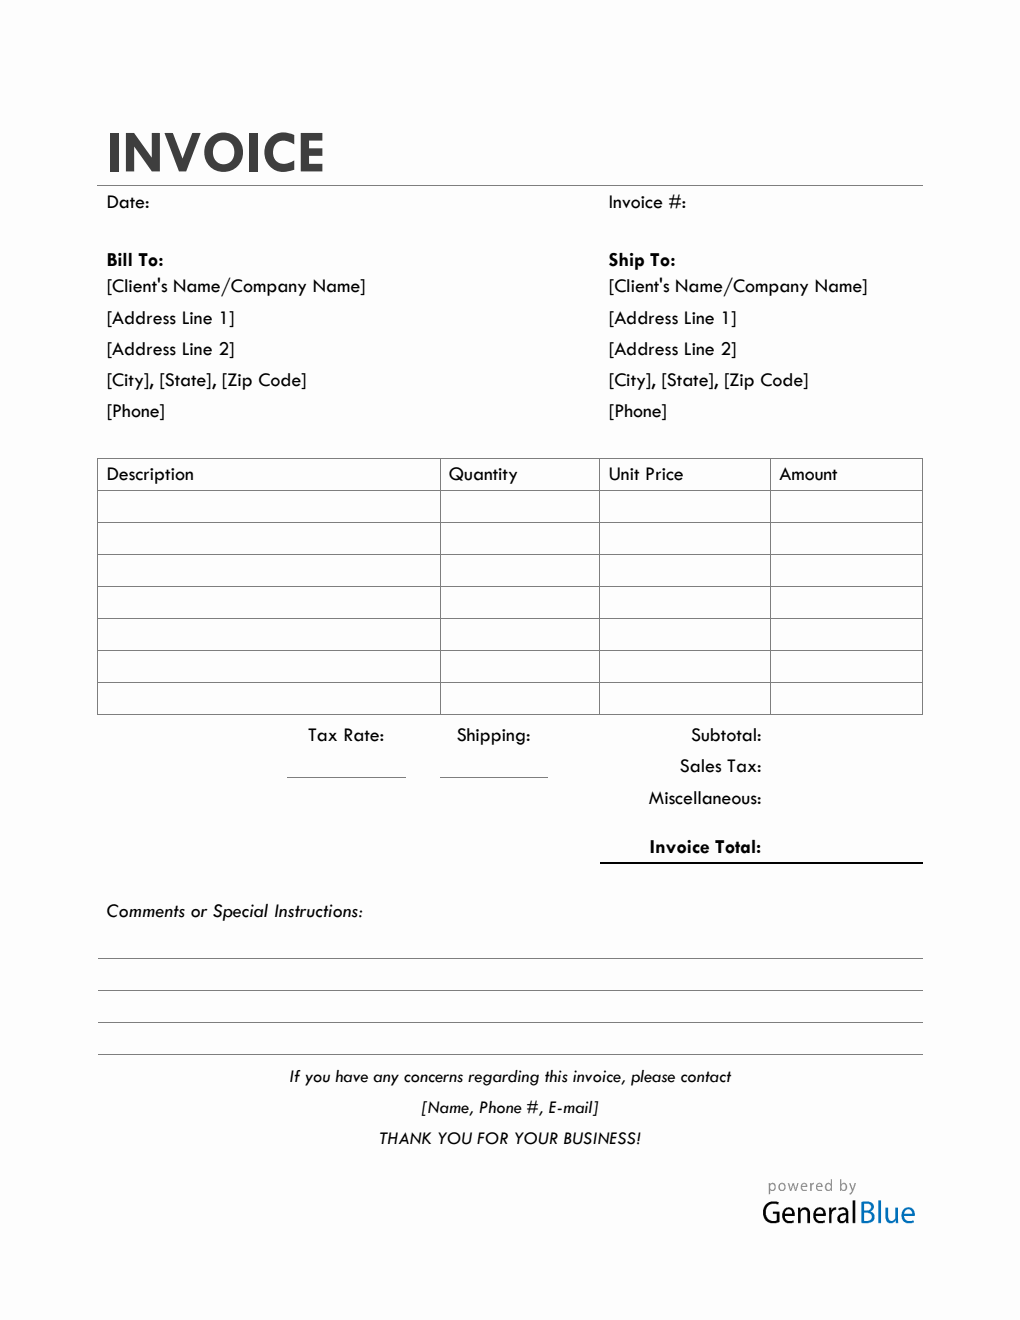 Bill Of Sale Invoice in Word (Simple)